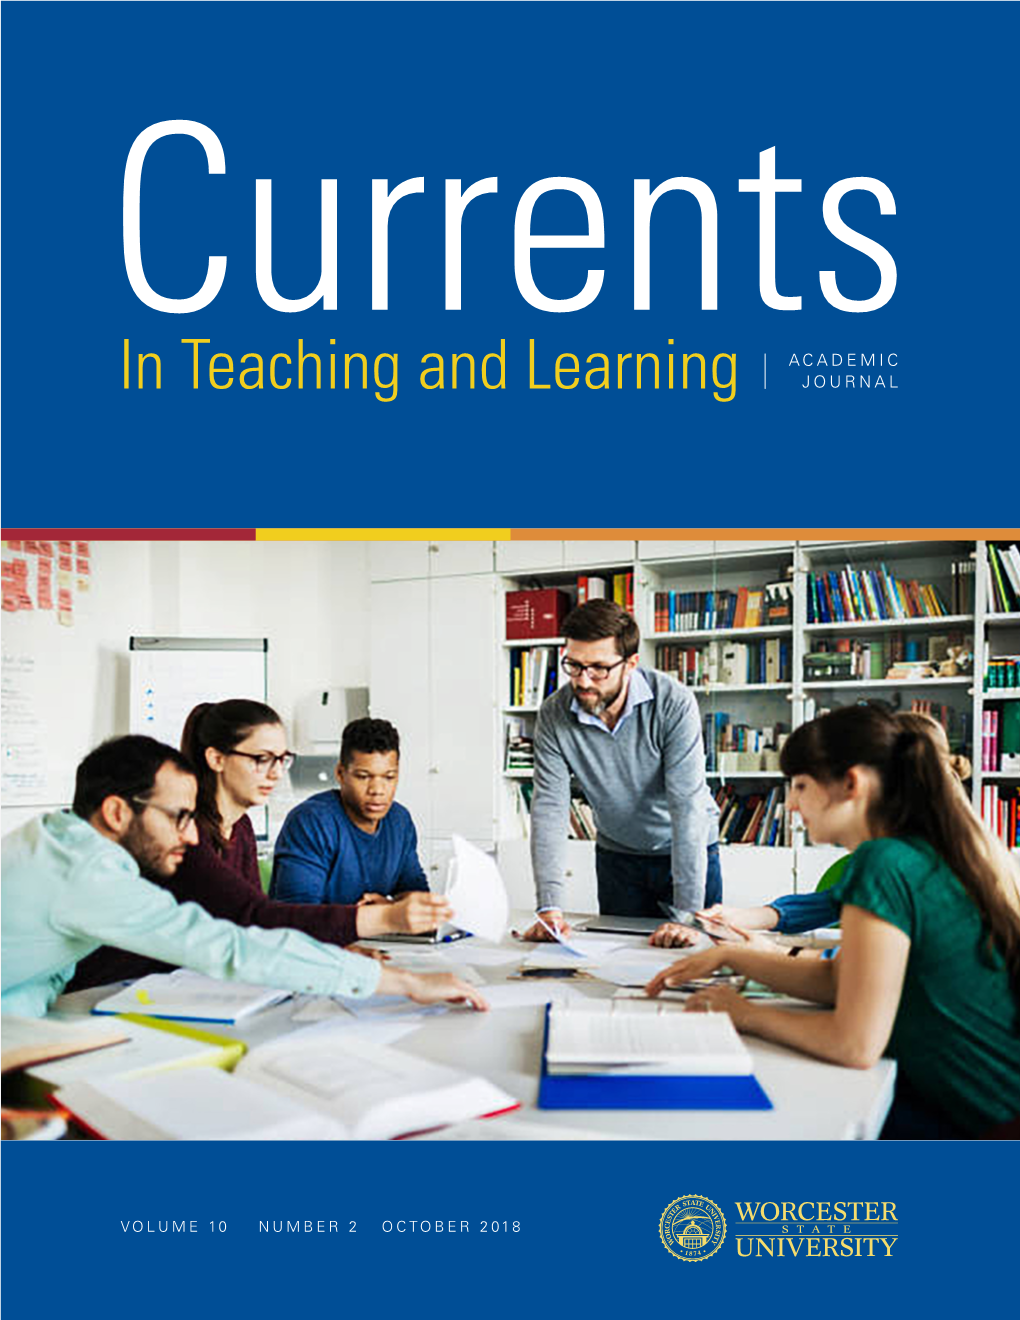 In Teaching and Learning JOURNAL